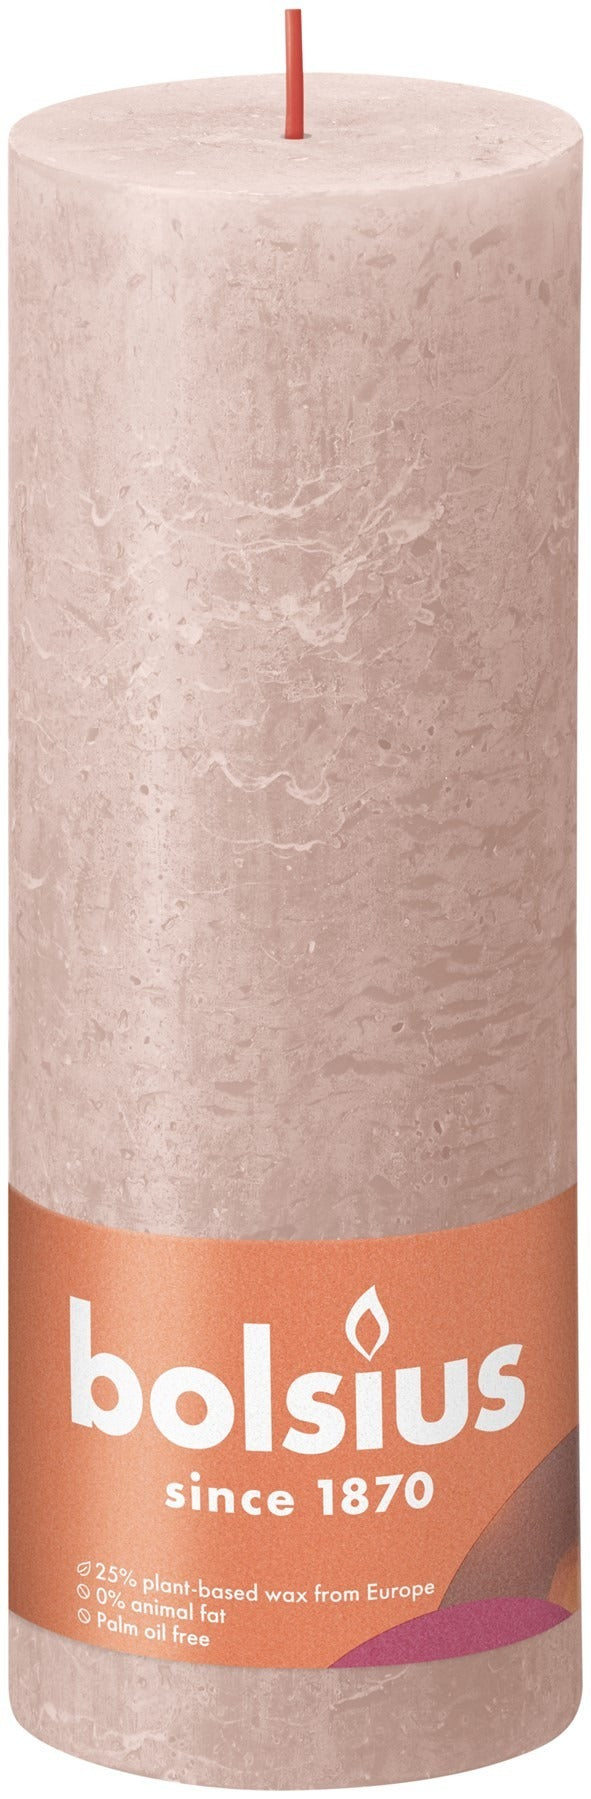 View Misty Pink Bolsius Rustic Shine Pillar Candle 190 x 68mm information